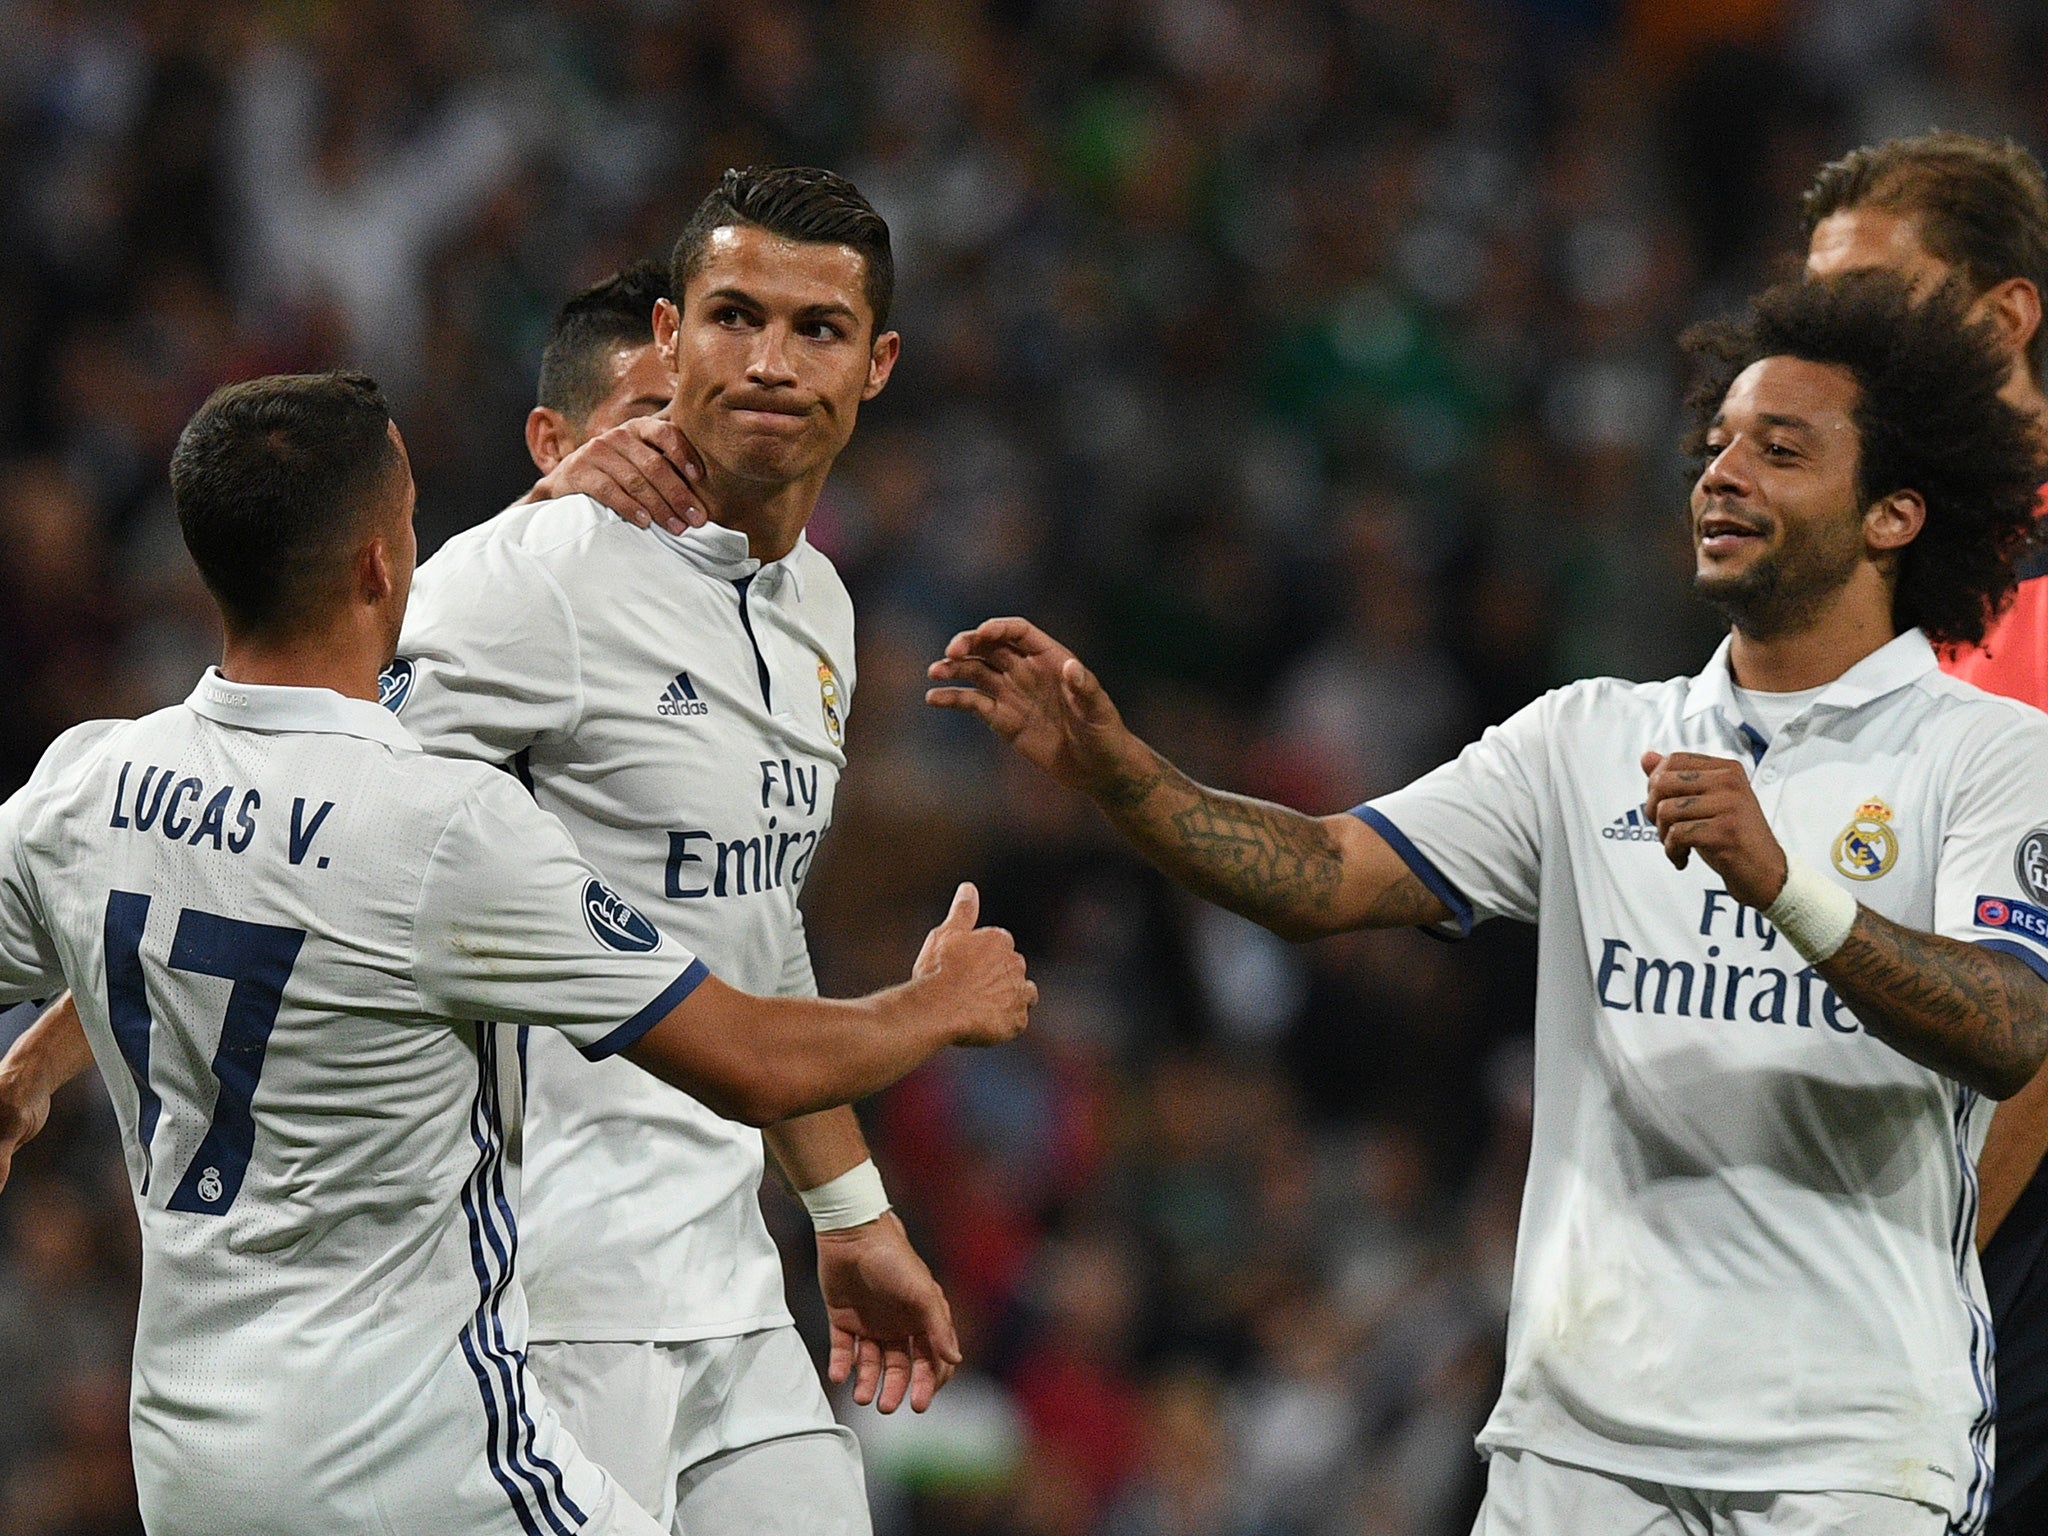 Ronaldo decided not to celebrate scoring against his former club